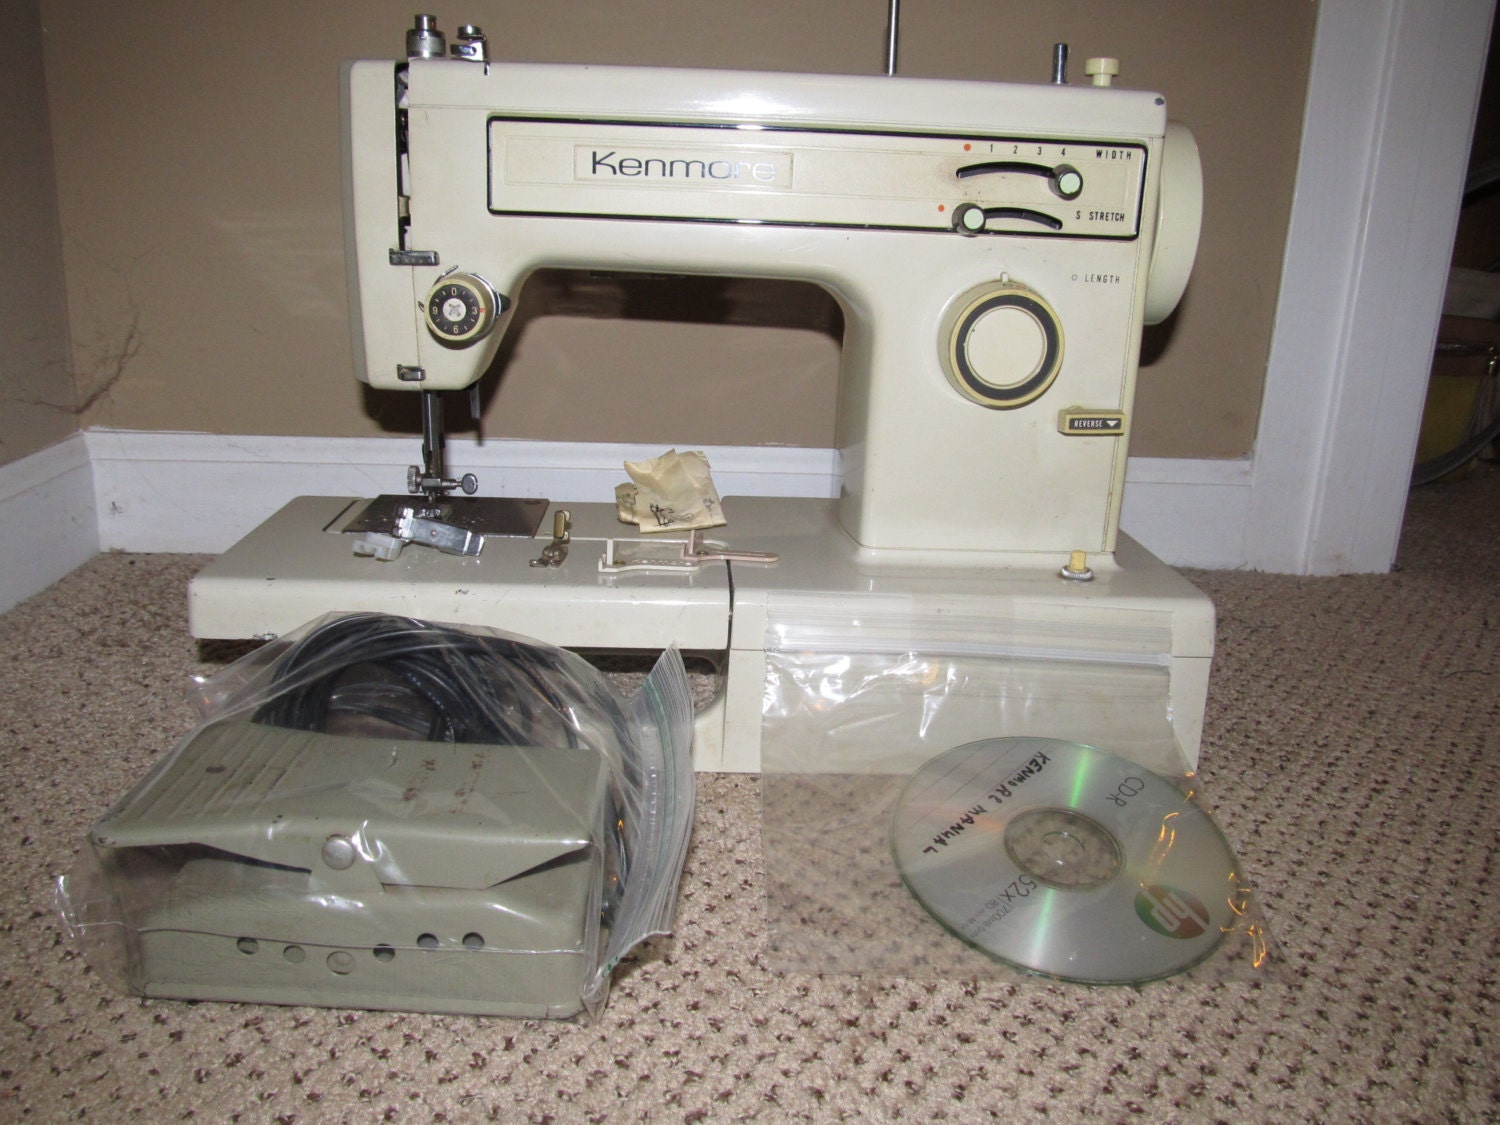 Sears Kenmore Sewing Machine Instructions 15813200